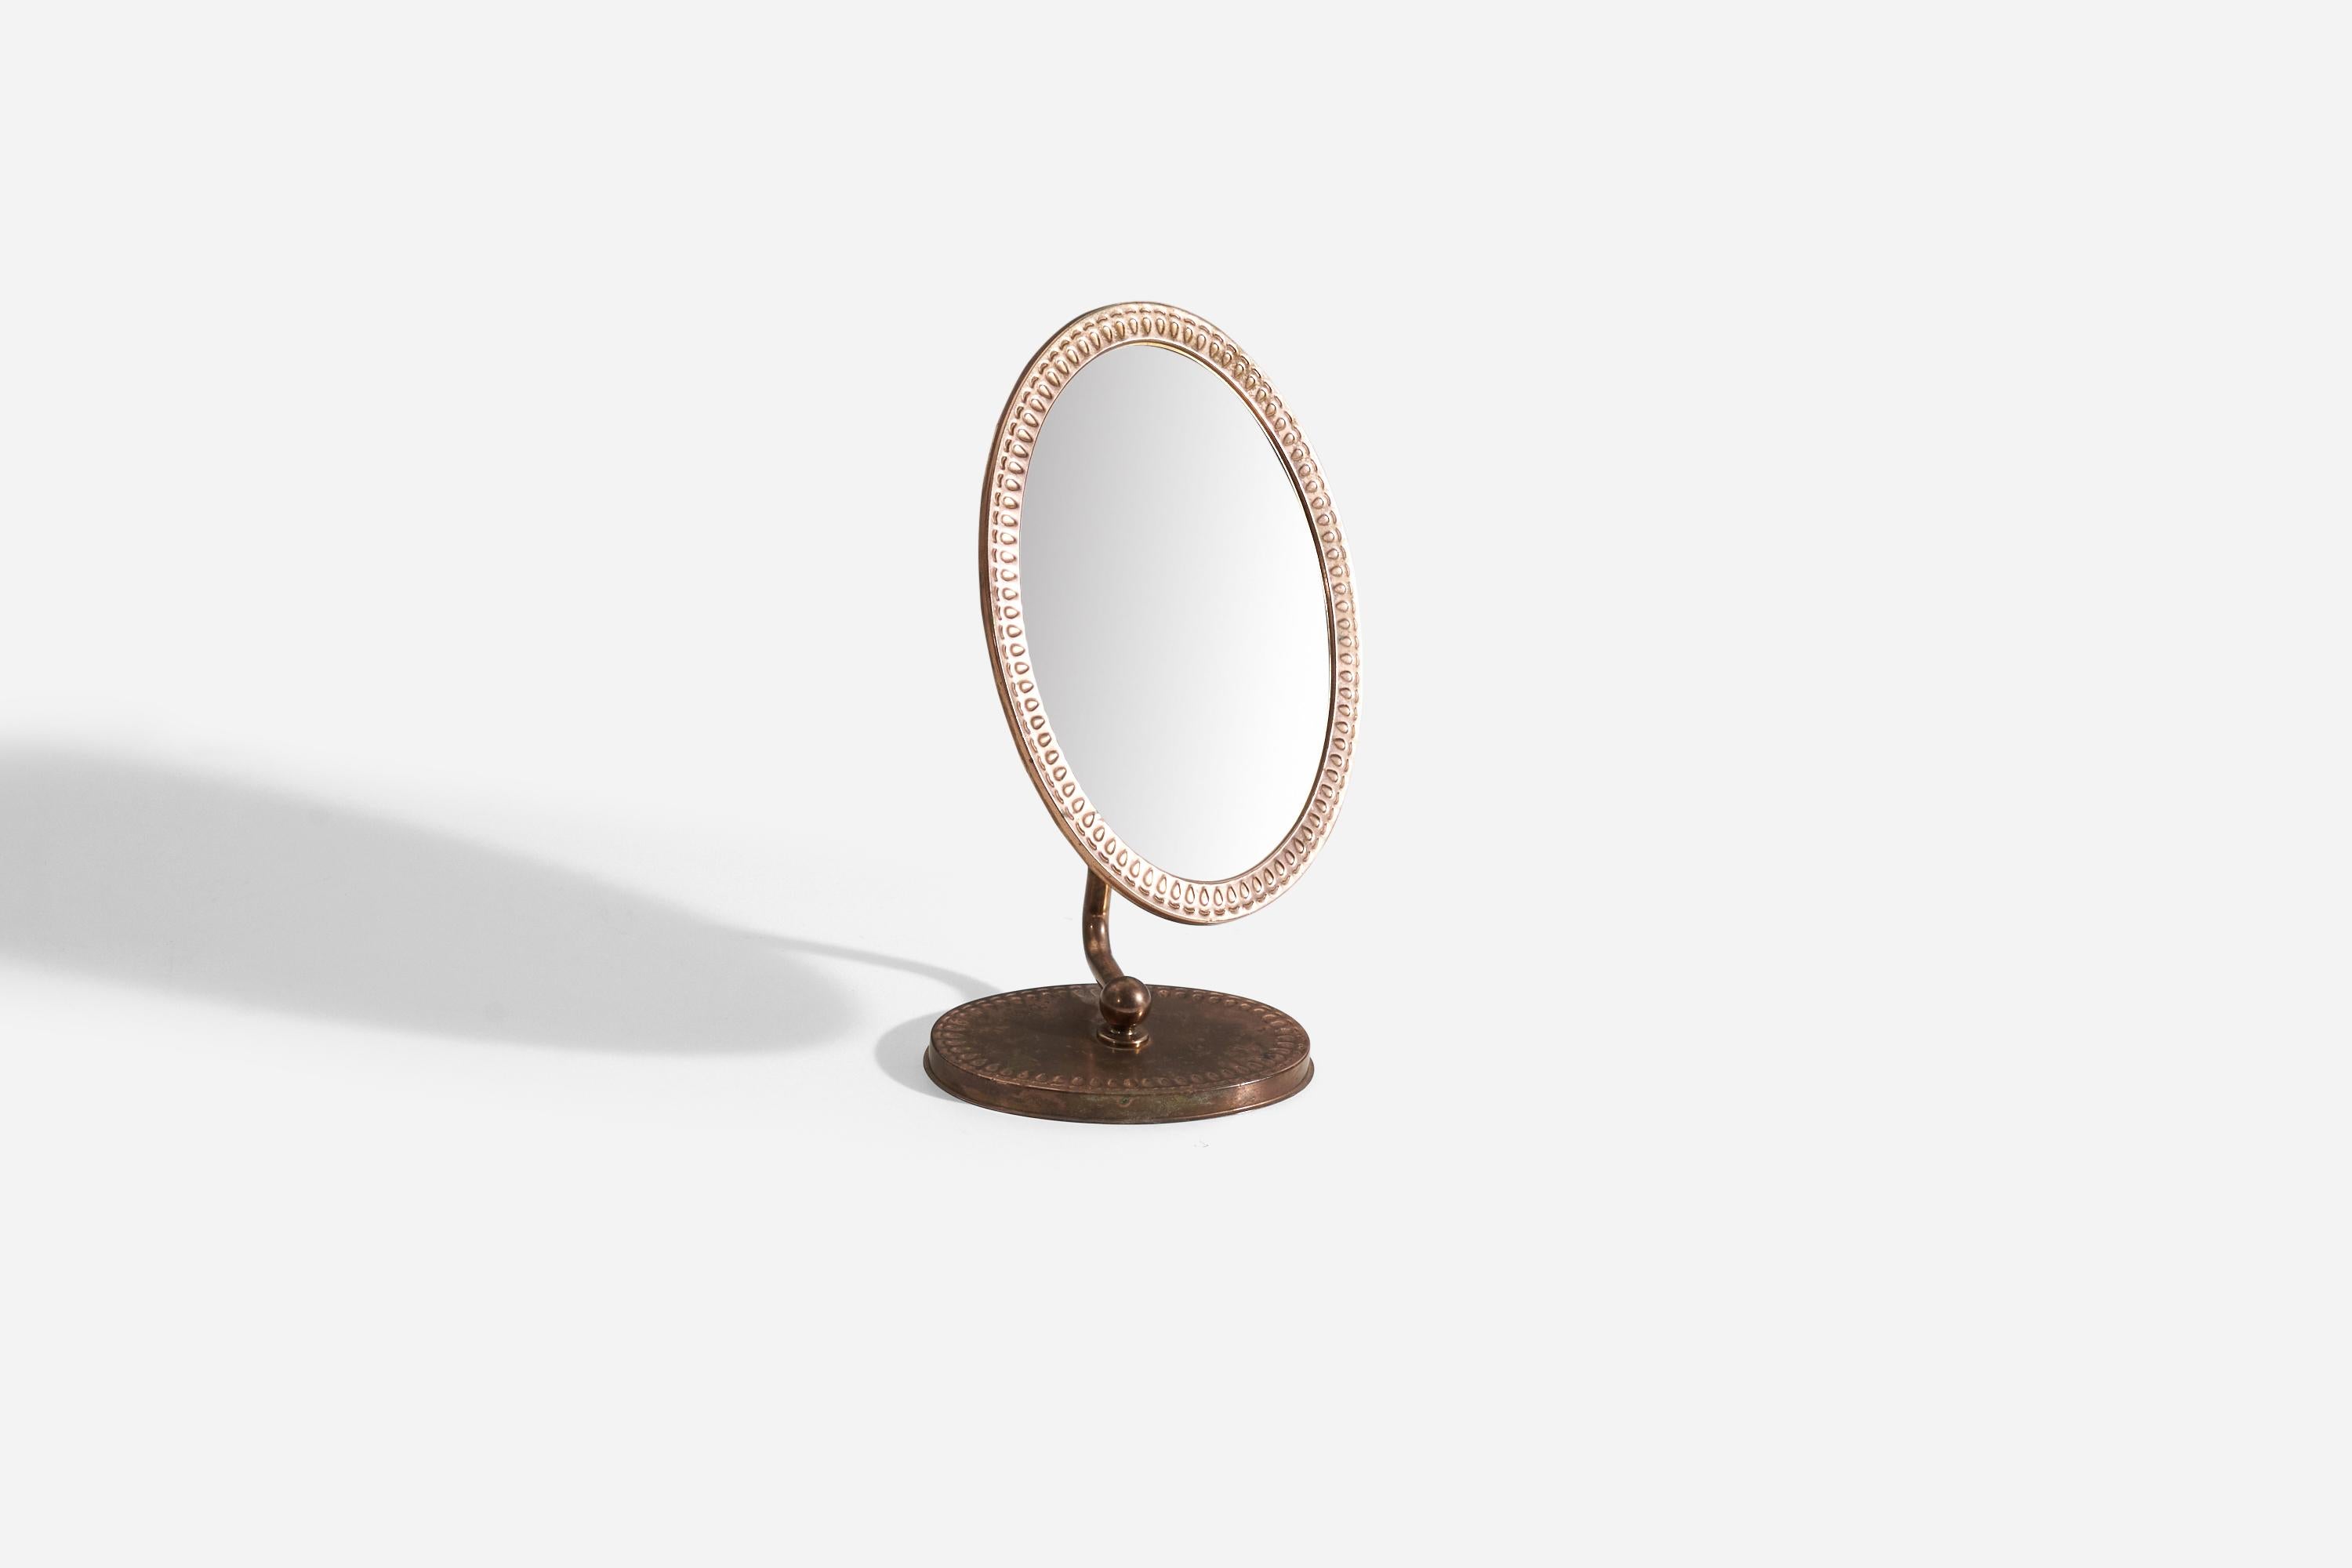 An adjustable copper table mirror designed and produced in Sweden, c. 1950s-1960s.